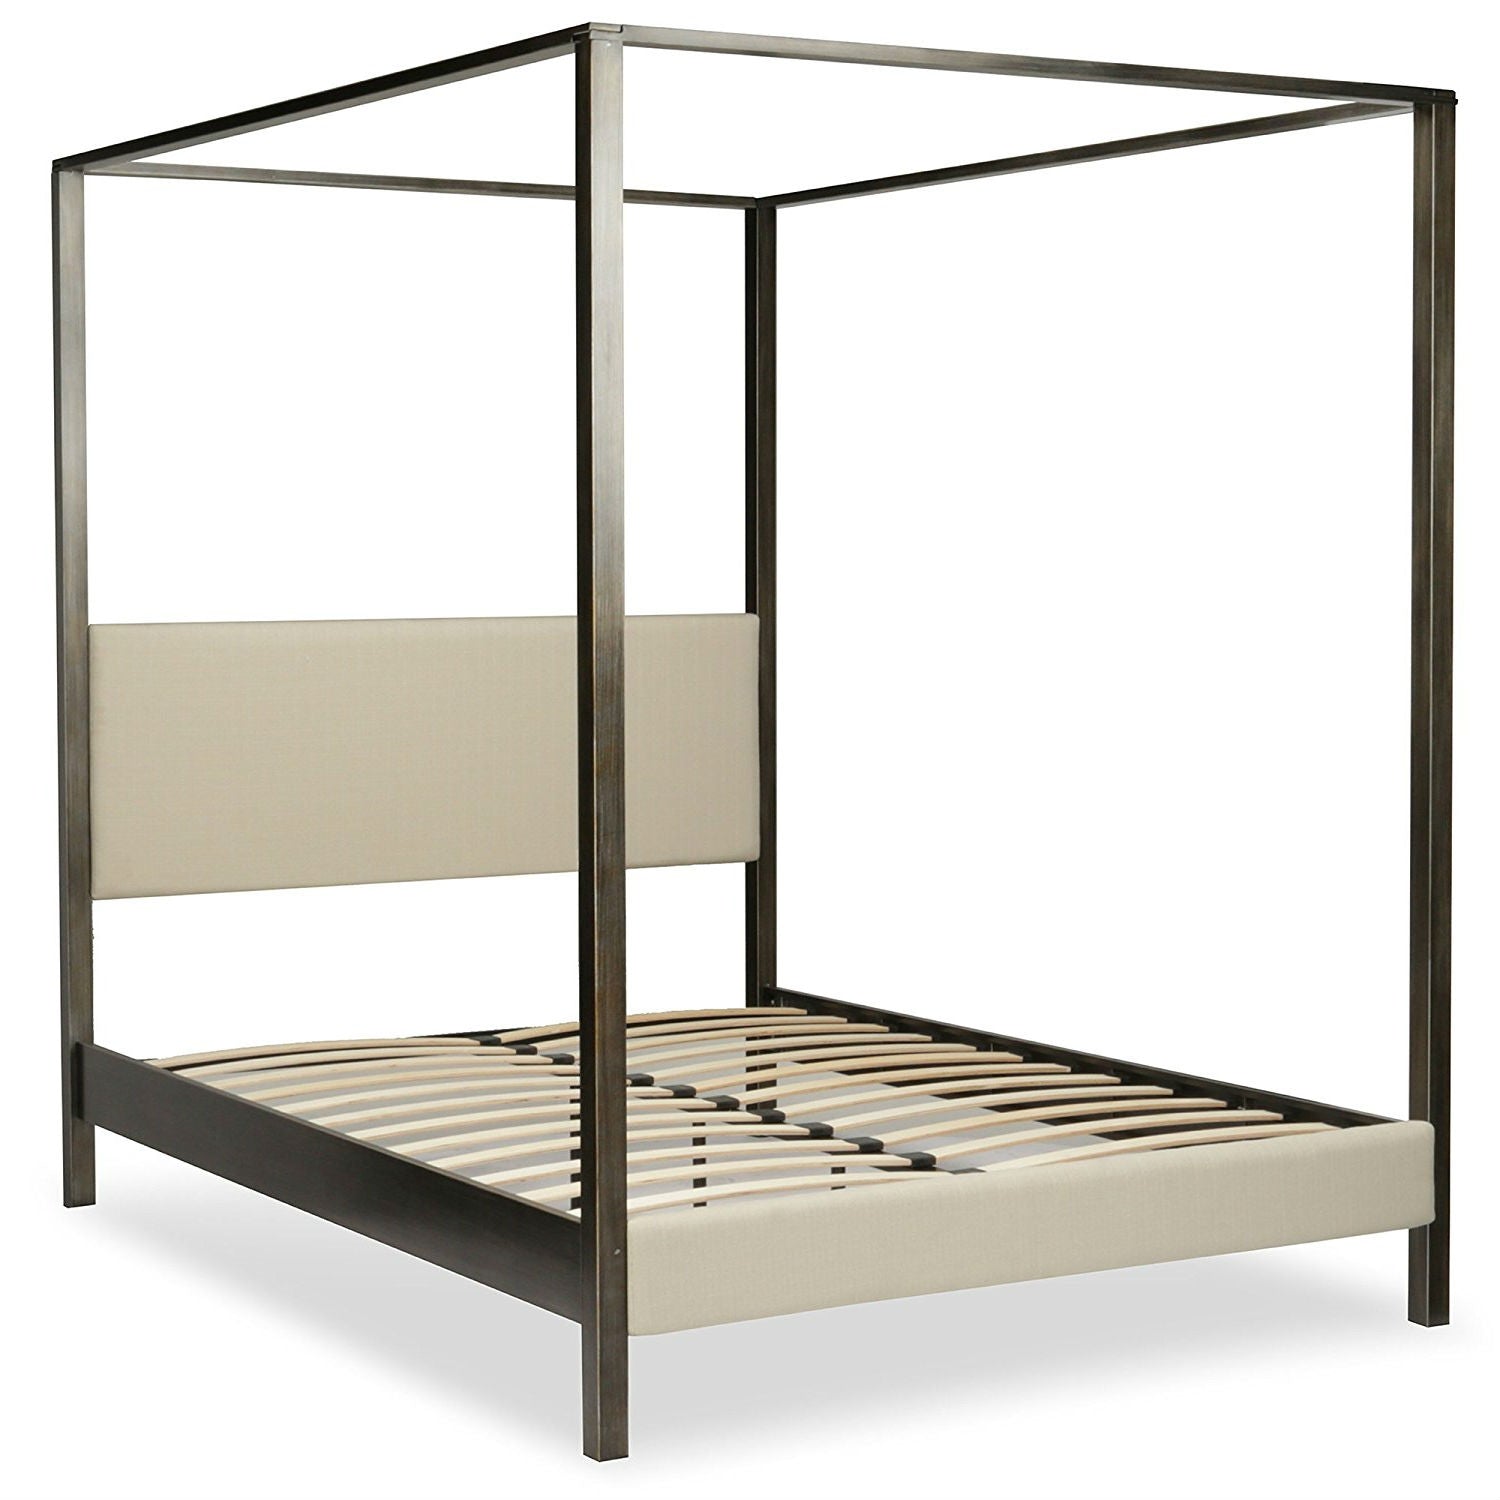 Fastfurnishings California King Size, Cal King Canopy Bed Frame